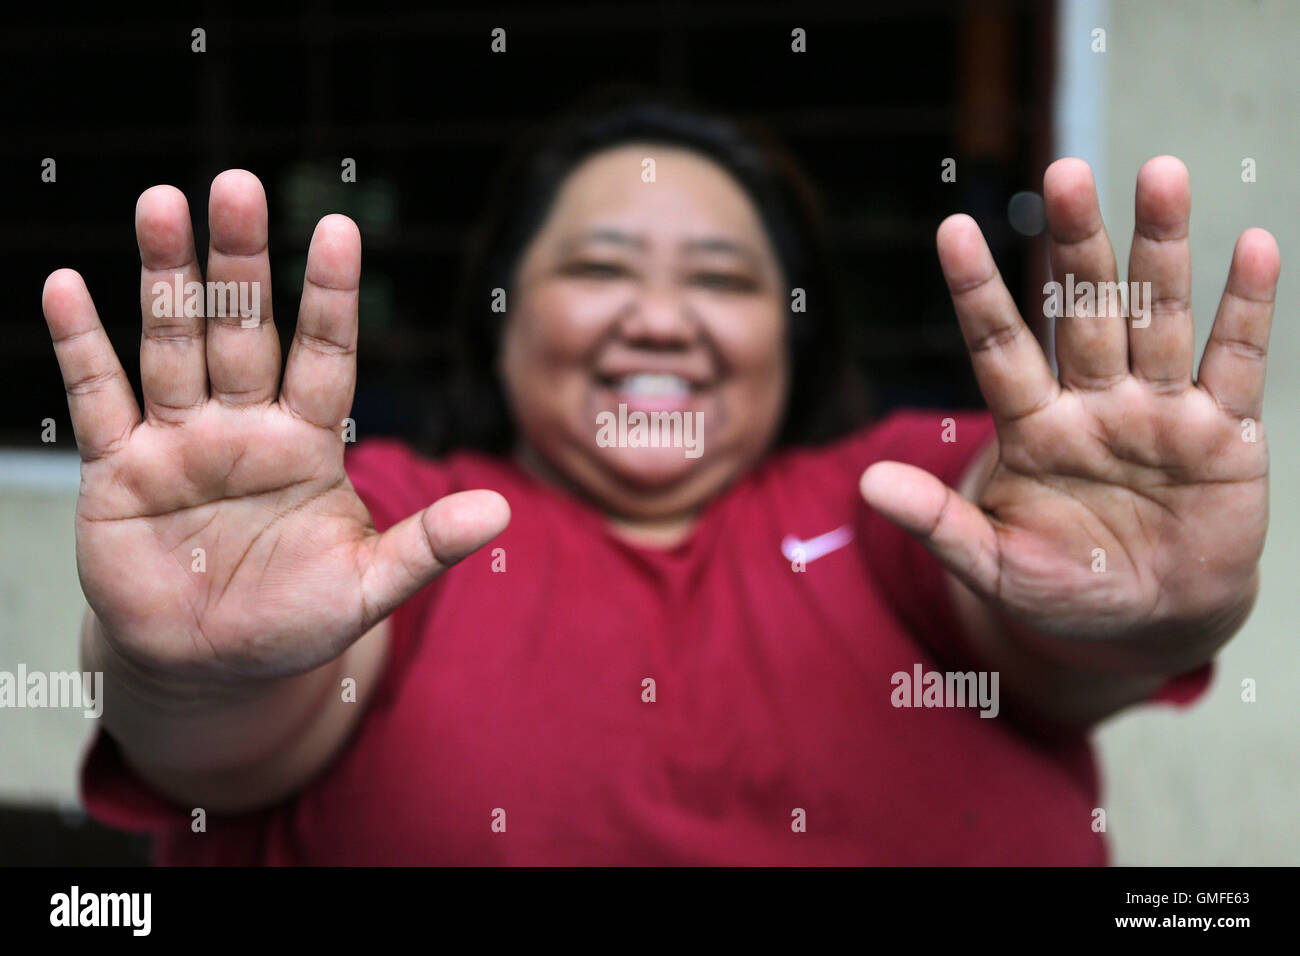 Quezon City, Philippines. 27th Aug, 2016. Philippine powerlifter Adeline Dumapong-Ancheta shows her hands before a training session in preparation for the Rio Paralympic Games in Quezon City, the Philippines, Aug. 27, 2016. Adeline Dumapong-Ancheta, a polio victim since she was three years old, has won many medals in powerlifting events in various international competitions and is qualified to compete in the Rio Paralympic Games in September. © Rouelle Umali/Xinhua/Alamy Live News Stock Photo